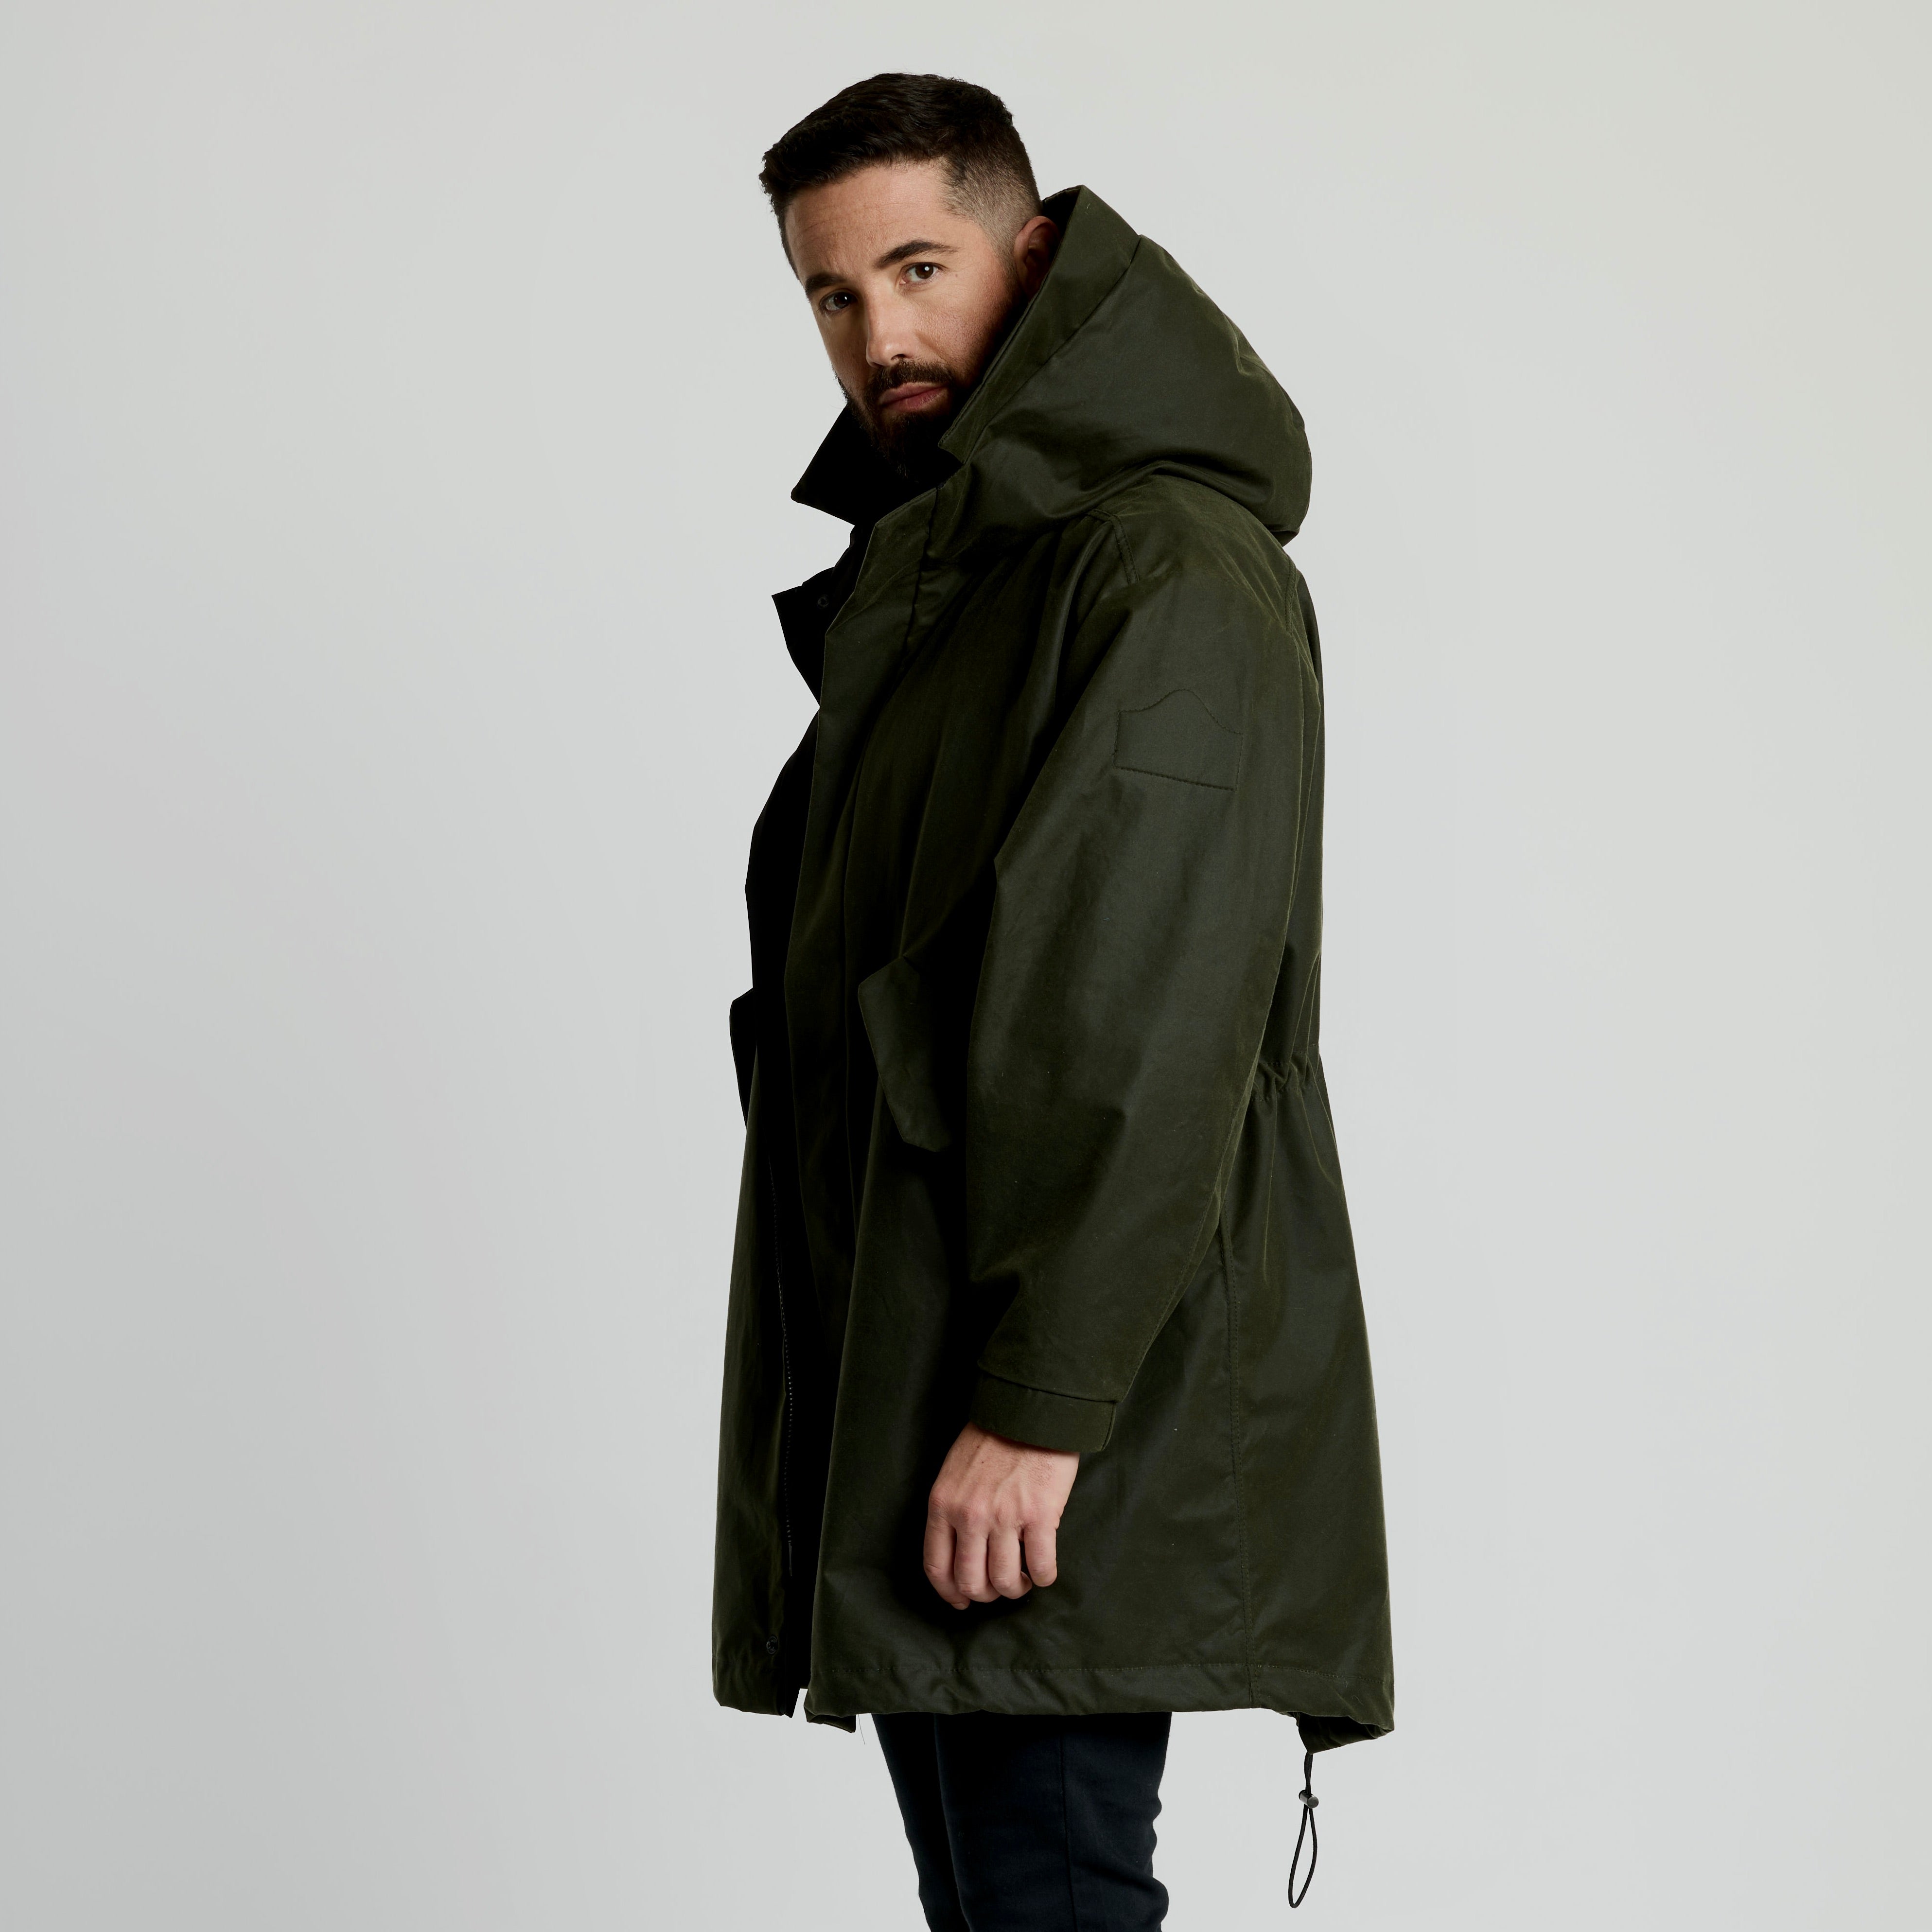 The M65 – Olmsted Outerwear